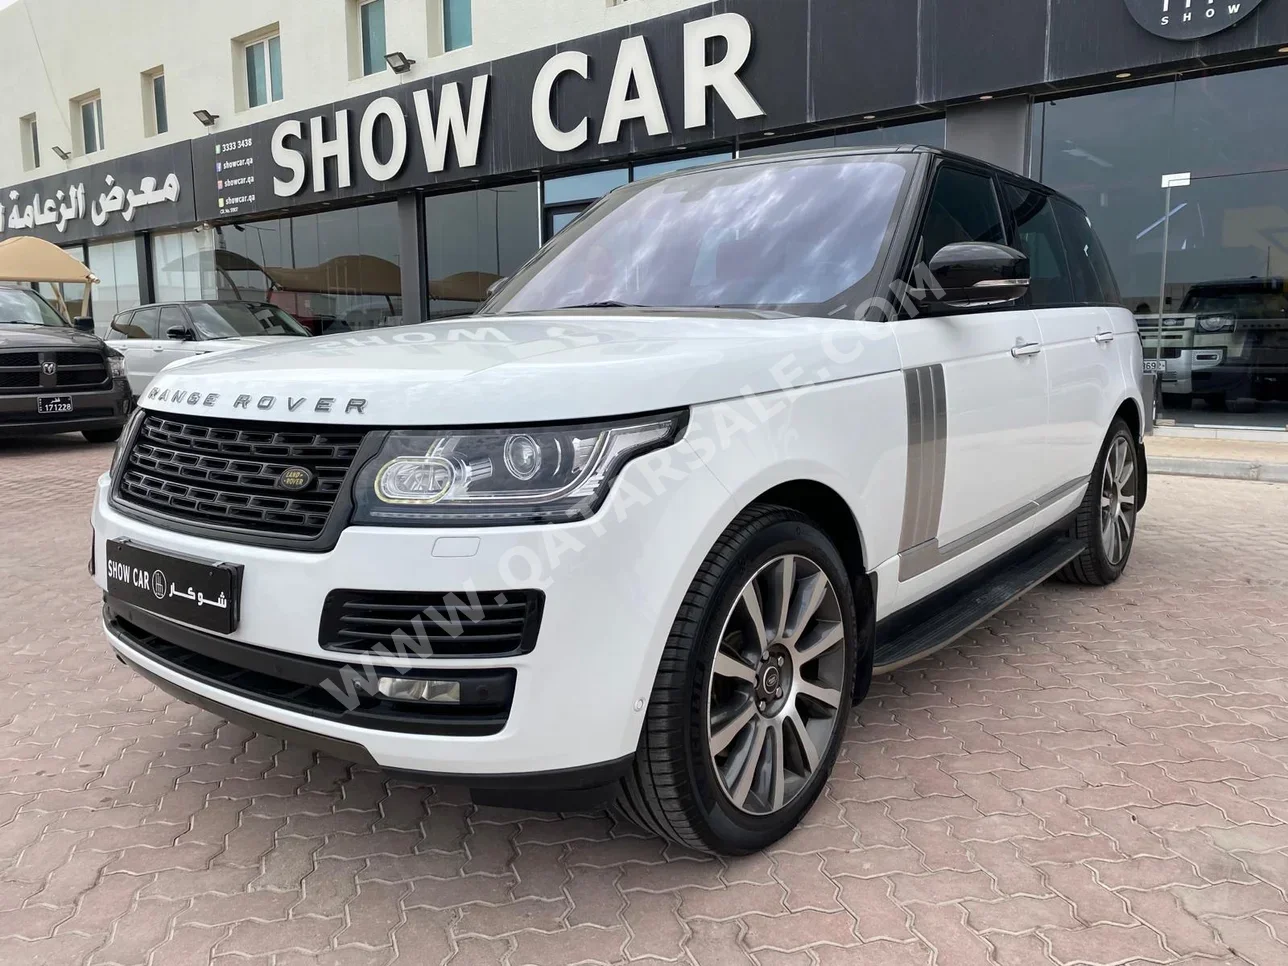 Land Rover  Range Rover  Vogue SE Super charged  2014  Automatic  234,000 Km  8 Cylinder  Four Wheel Drive (4WD)  SUV  White